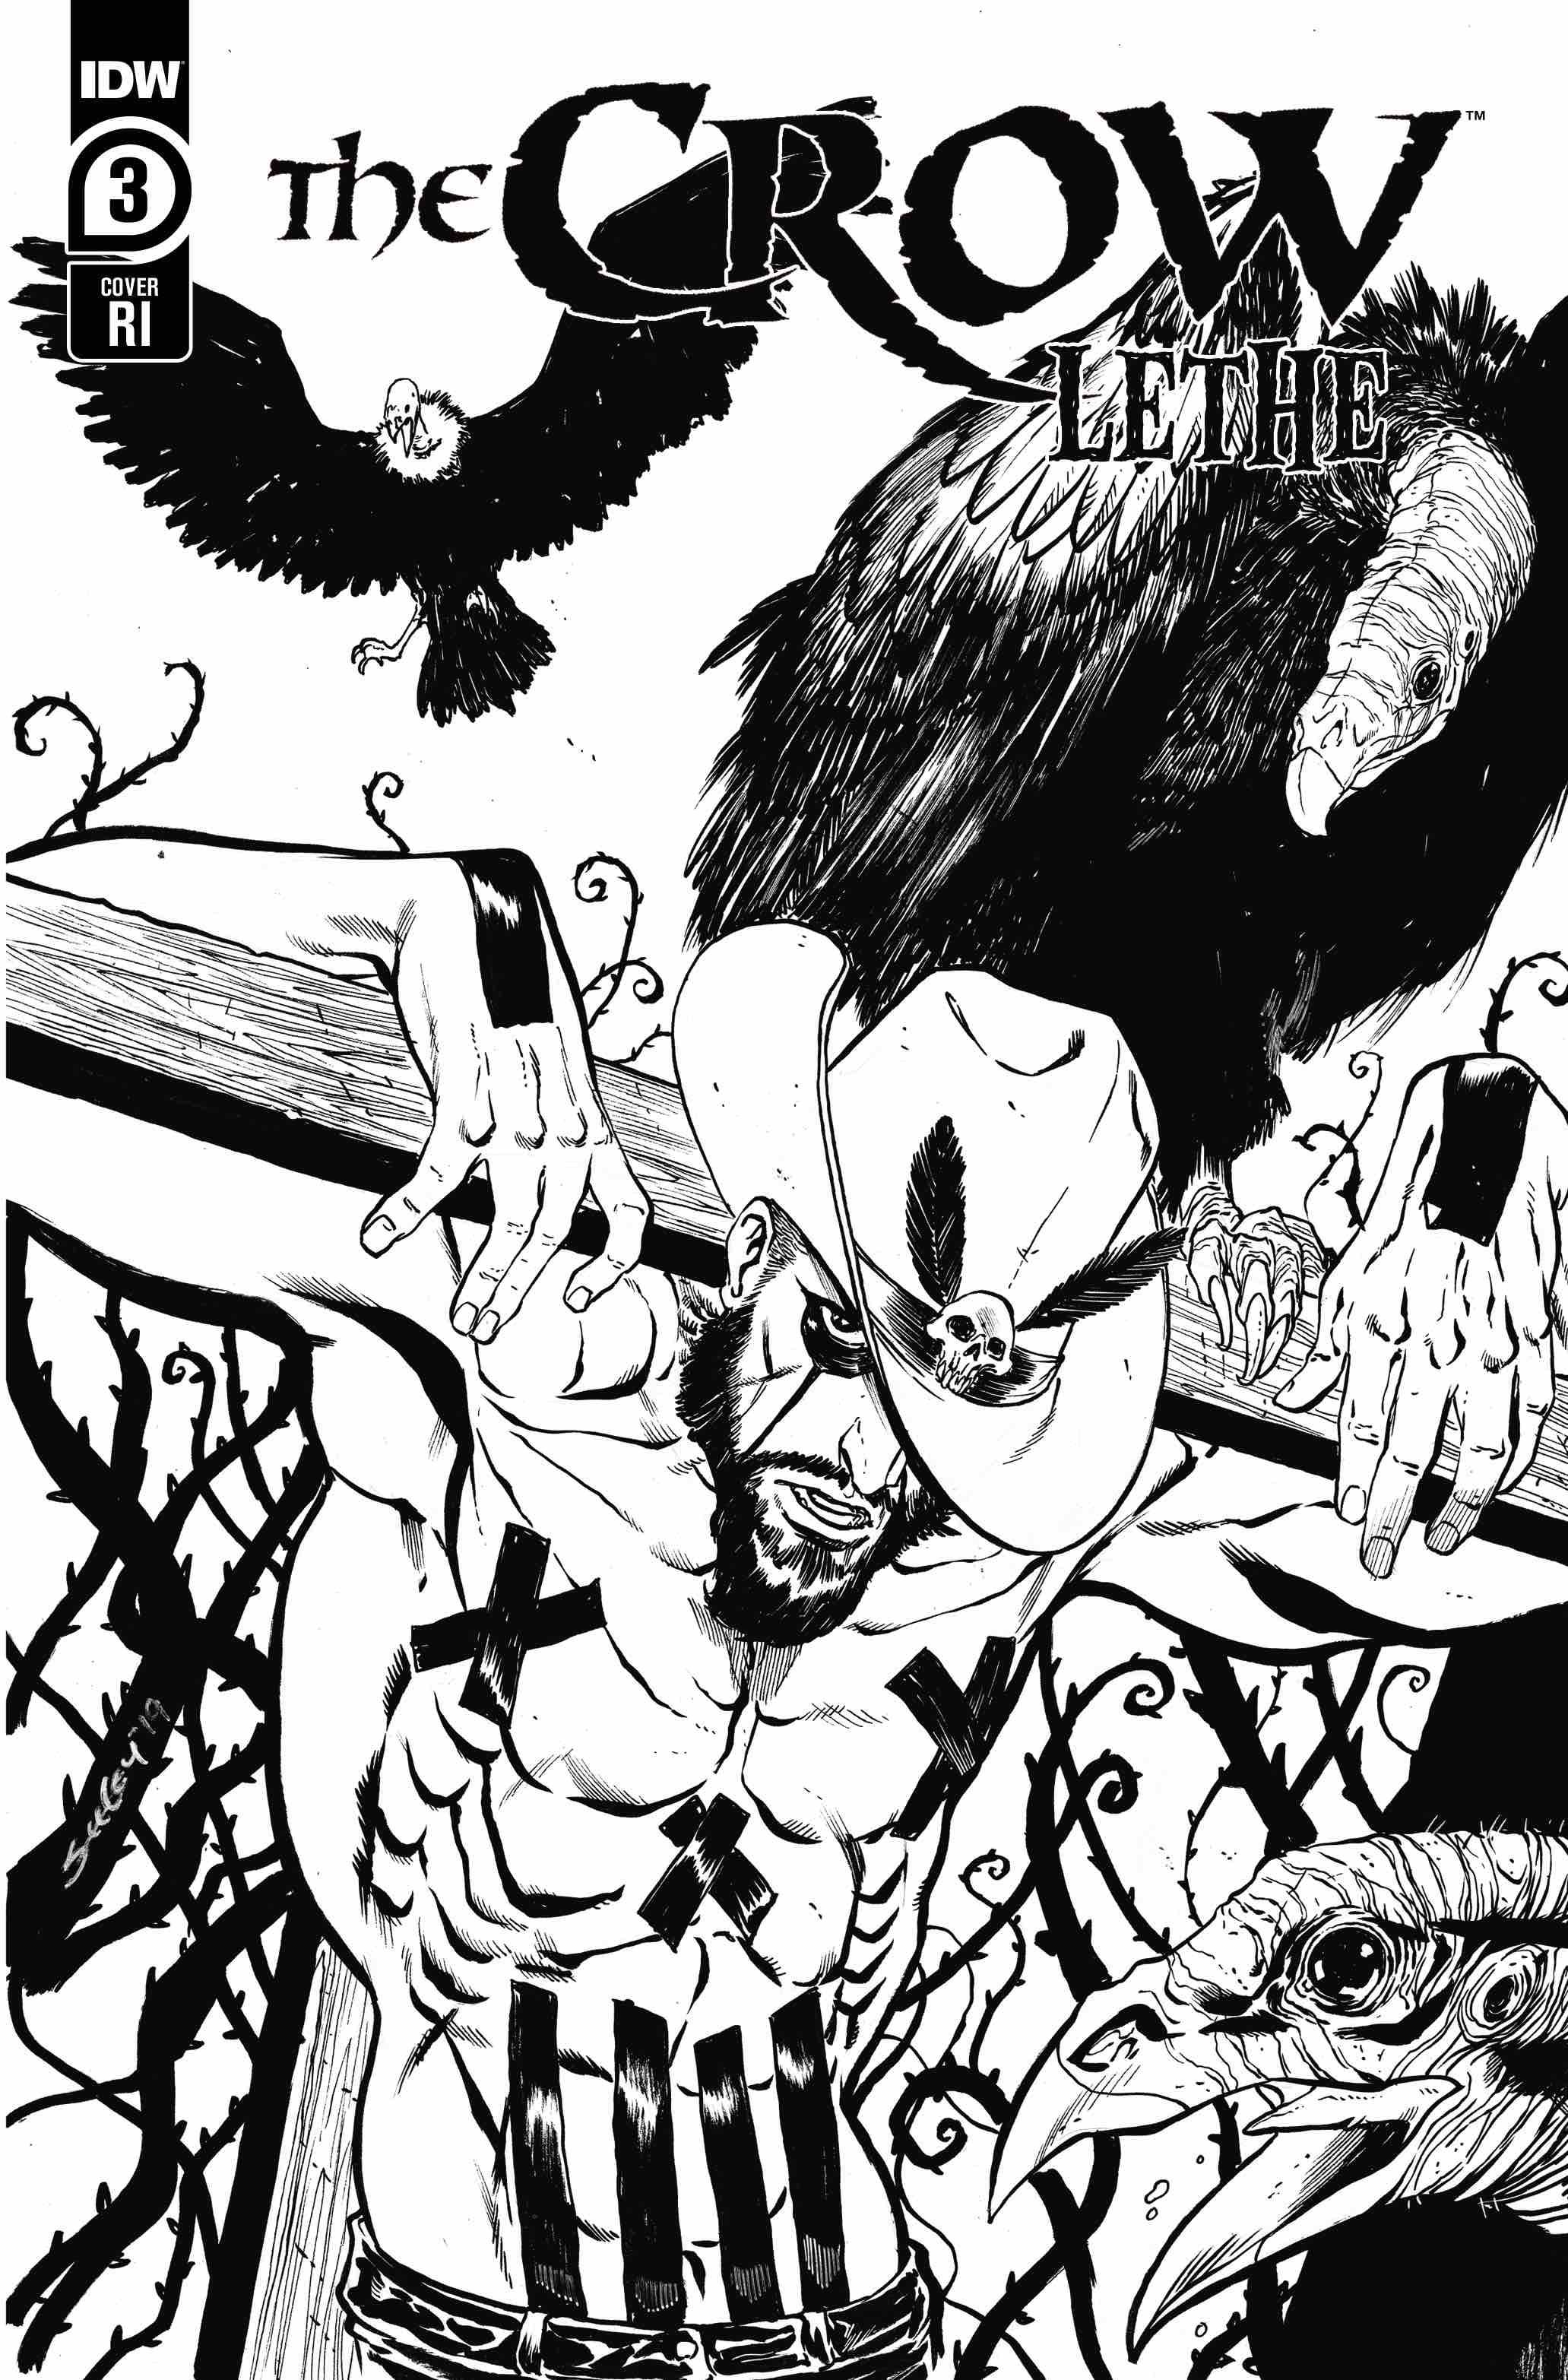 CROW LETHE #3 (OF 3) 1:10 VARIANT 08/05/20